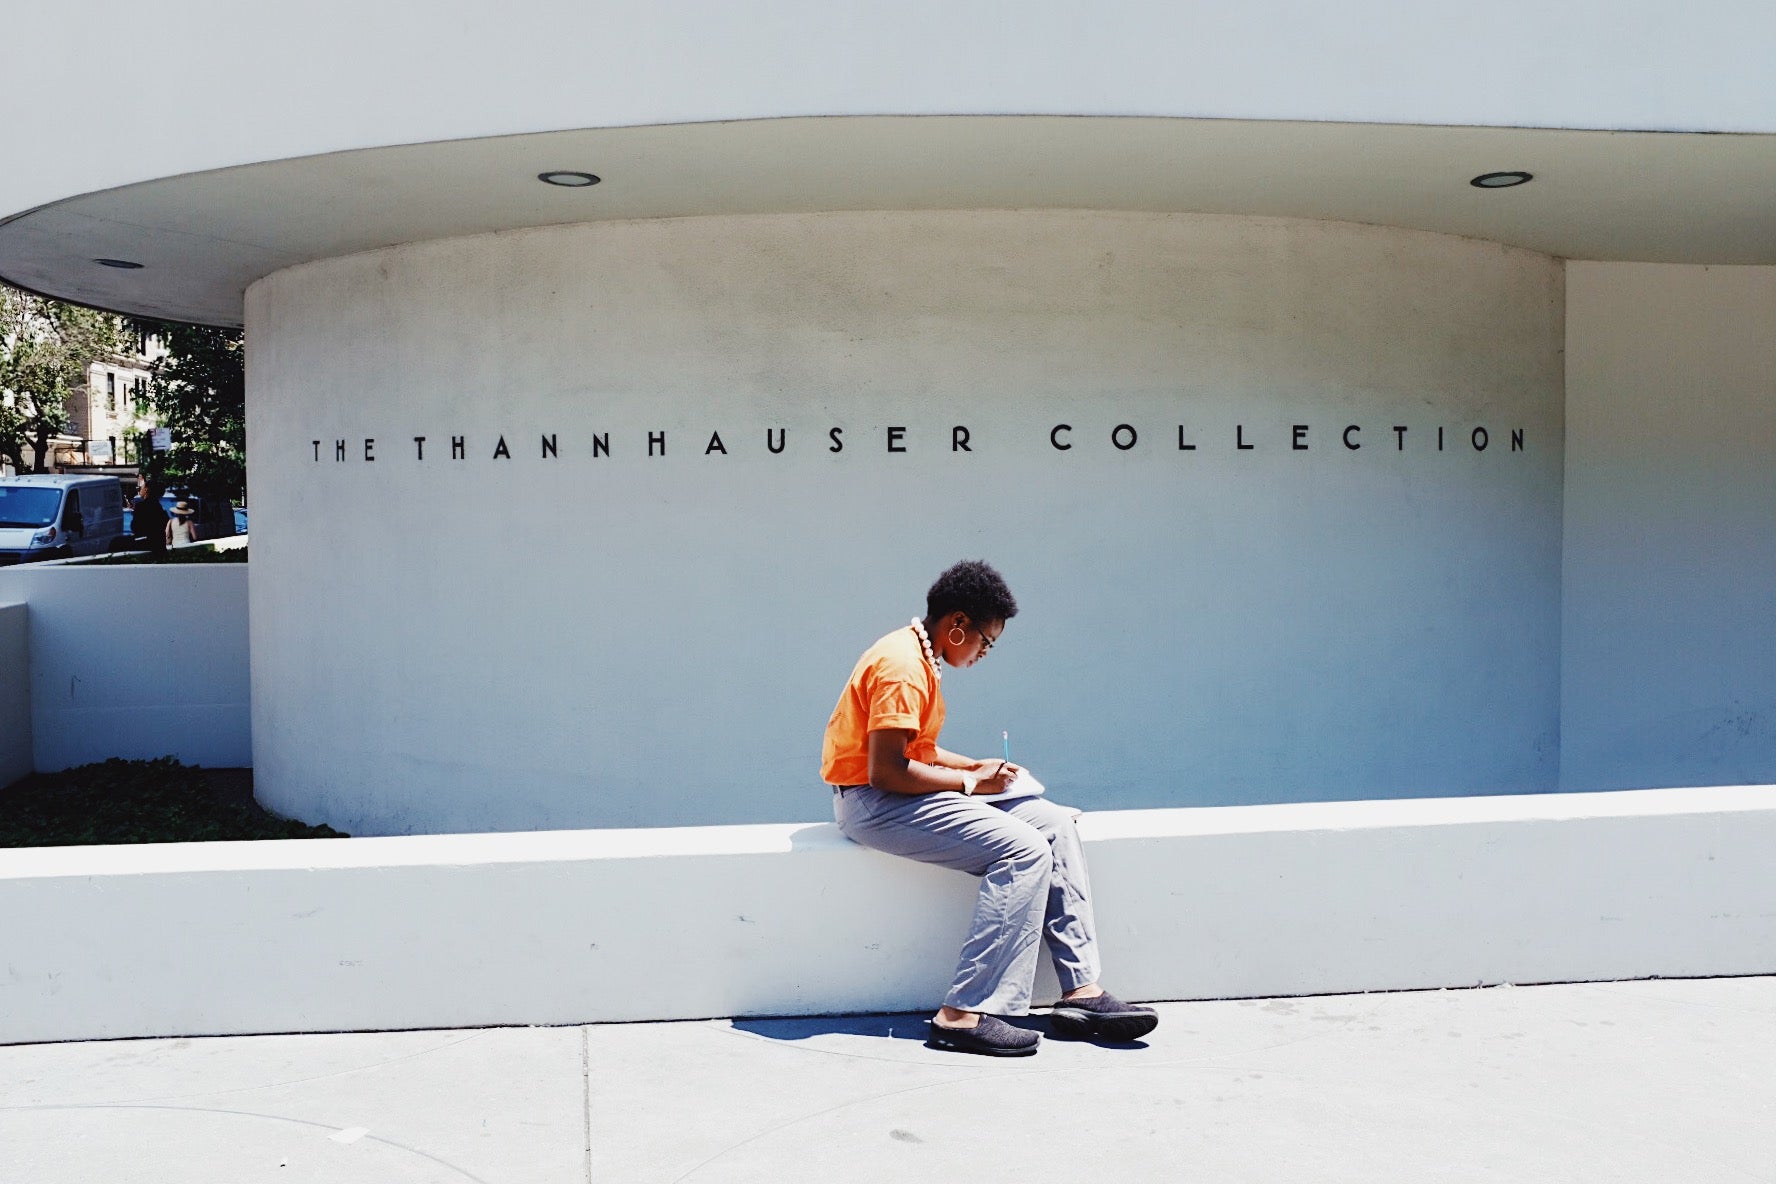 Lucy Laucht photo of boy sitting outside of museum